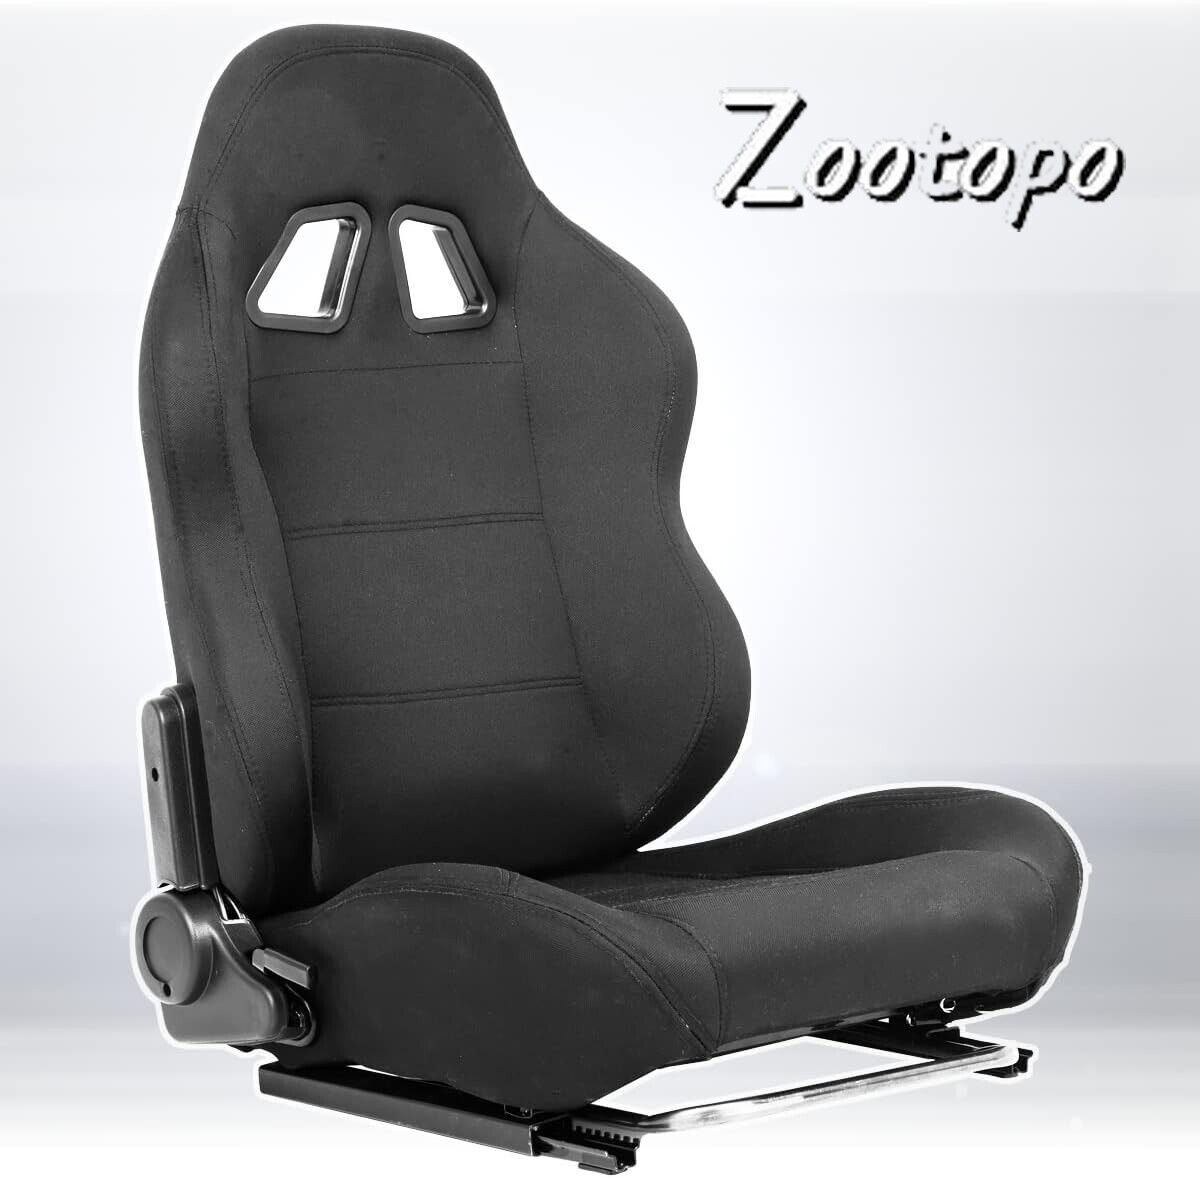 Zootopo Racing Seat With Adjustable Double Slide for Racing Simulator Cockpit